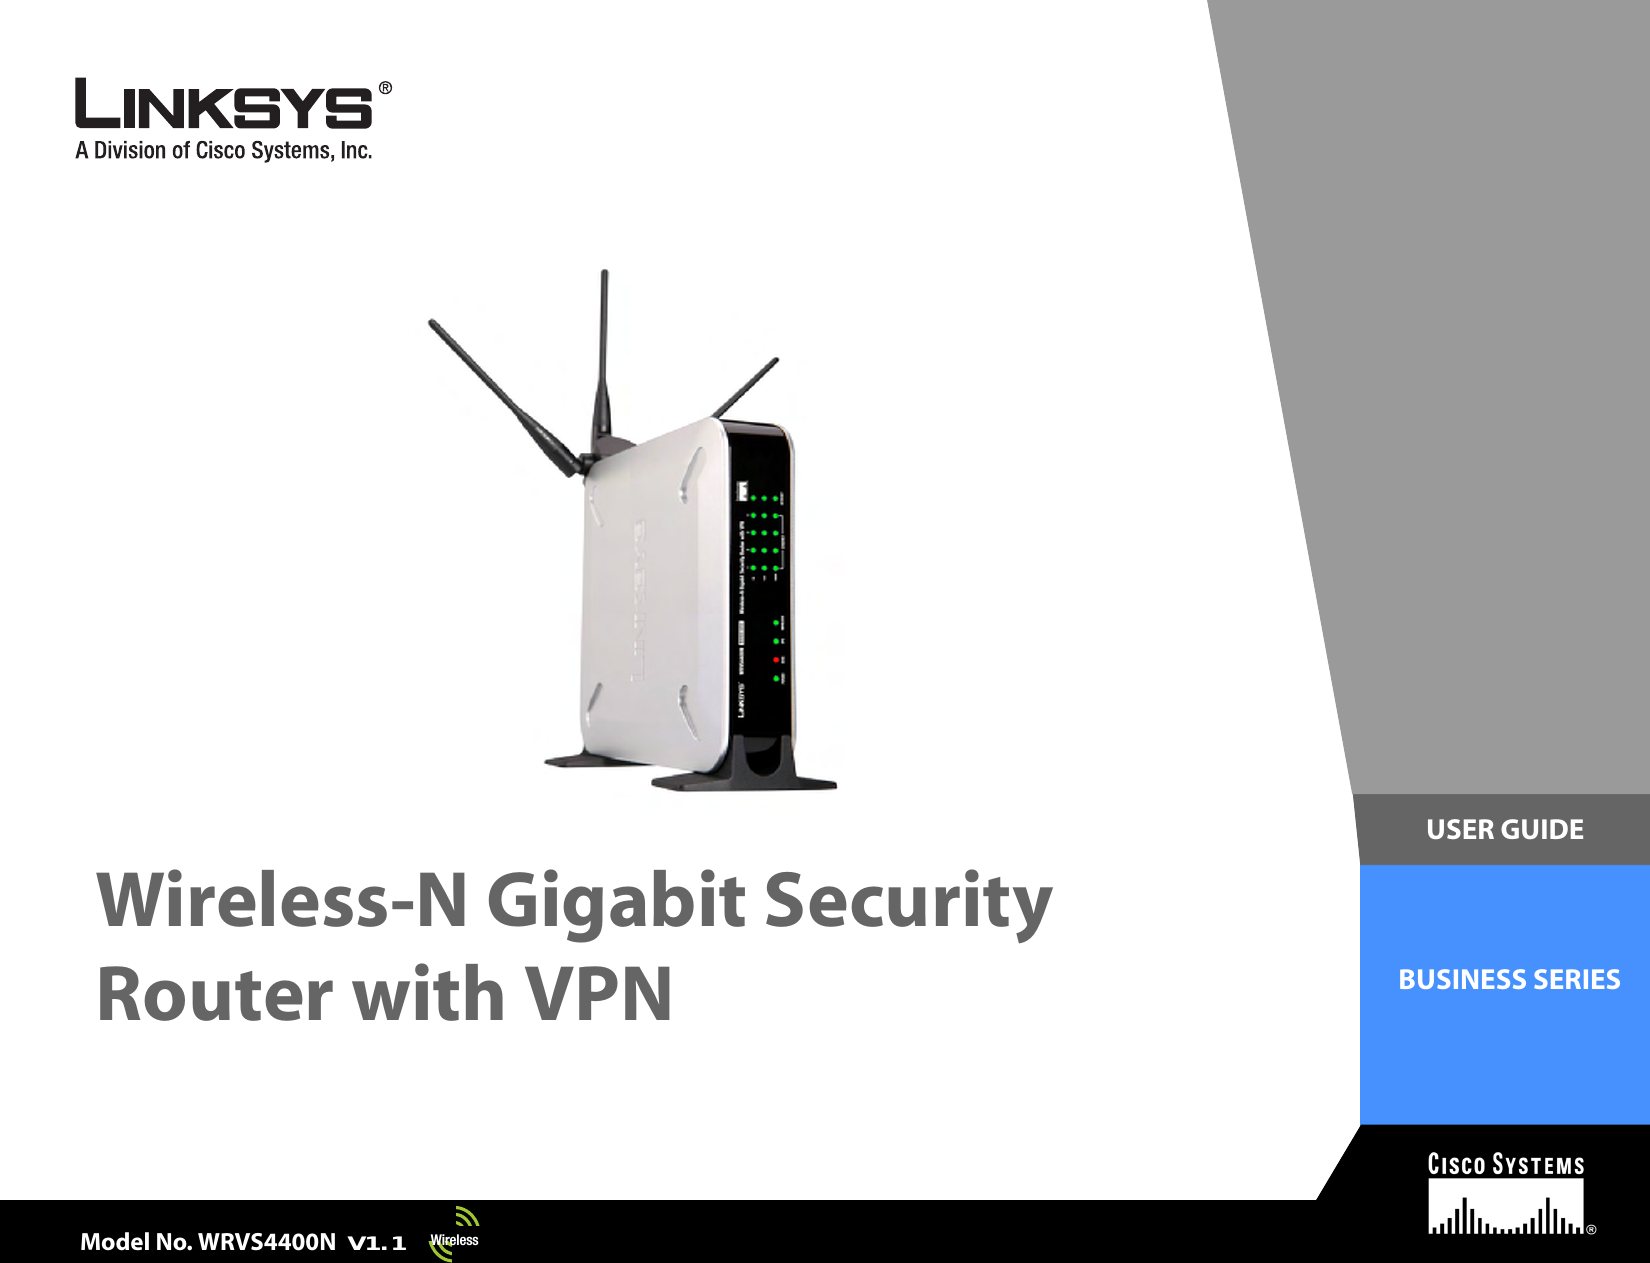 Model No.Model No.USER GUIDEBUSINESS SERIESModel No.Model No.Wireless-N Gigabit Security with PortsModel No. WRVS4400N V1.14-portuterRouter with VPNWireless